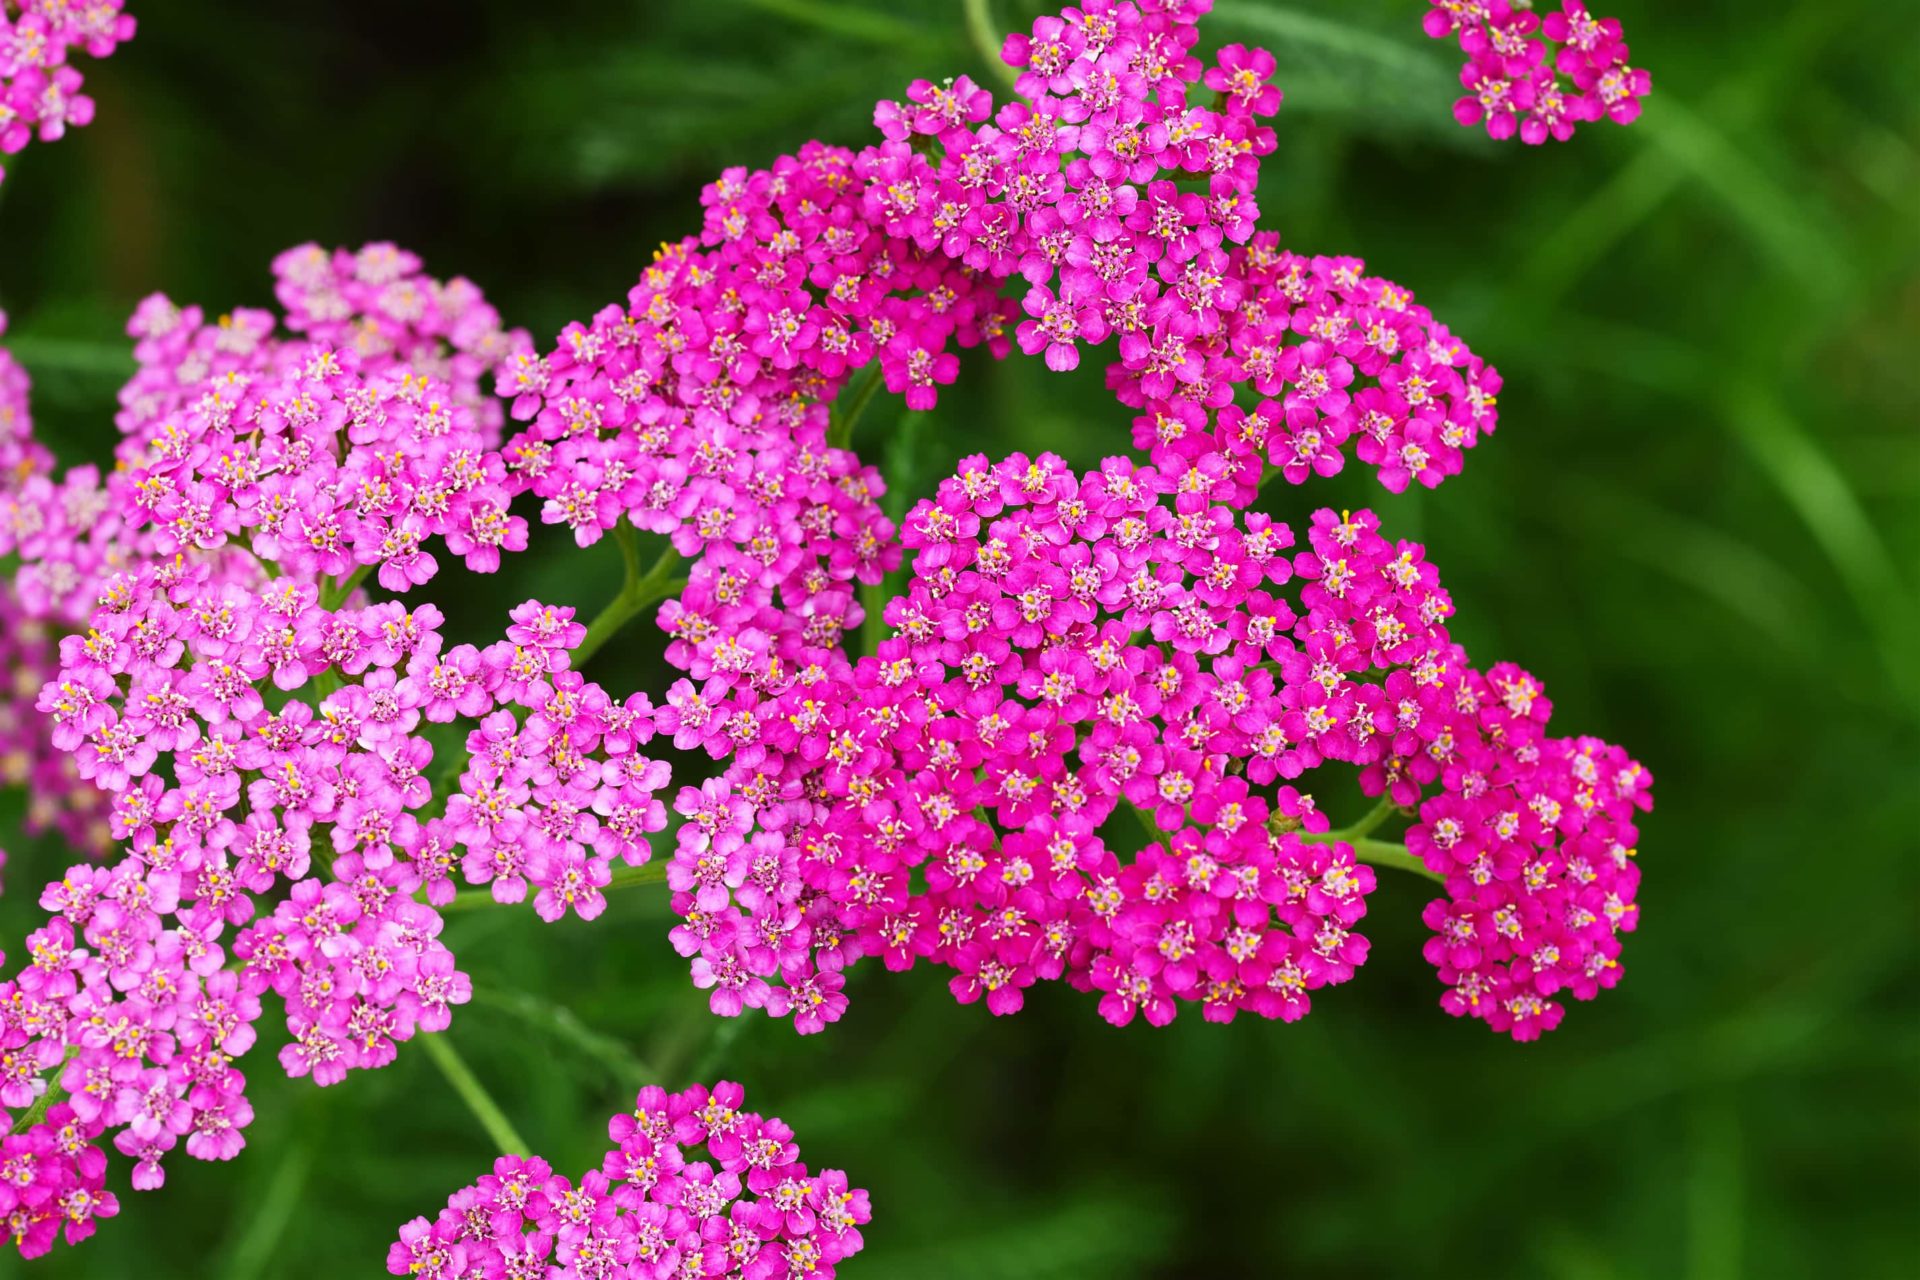 Closeup of pink yarrow flowers on soft green grass background